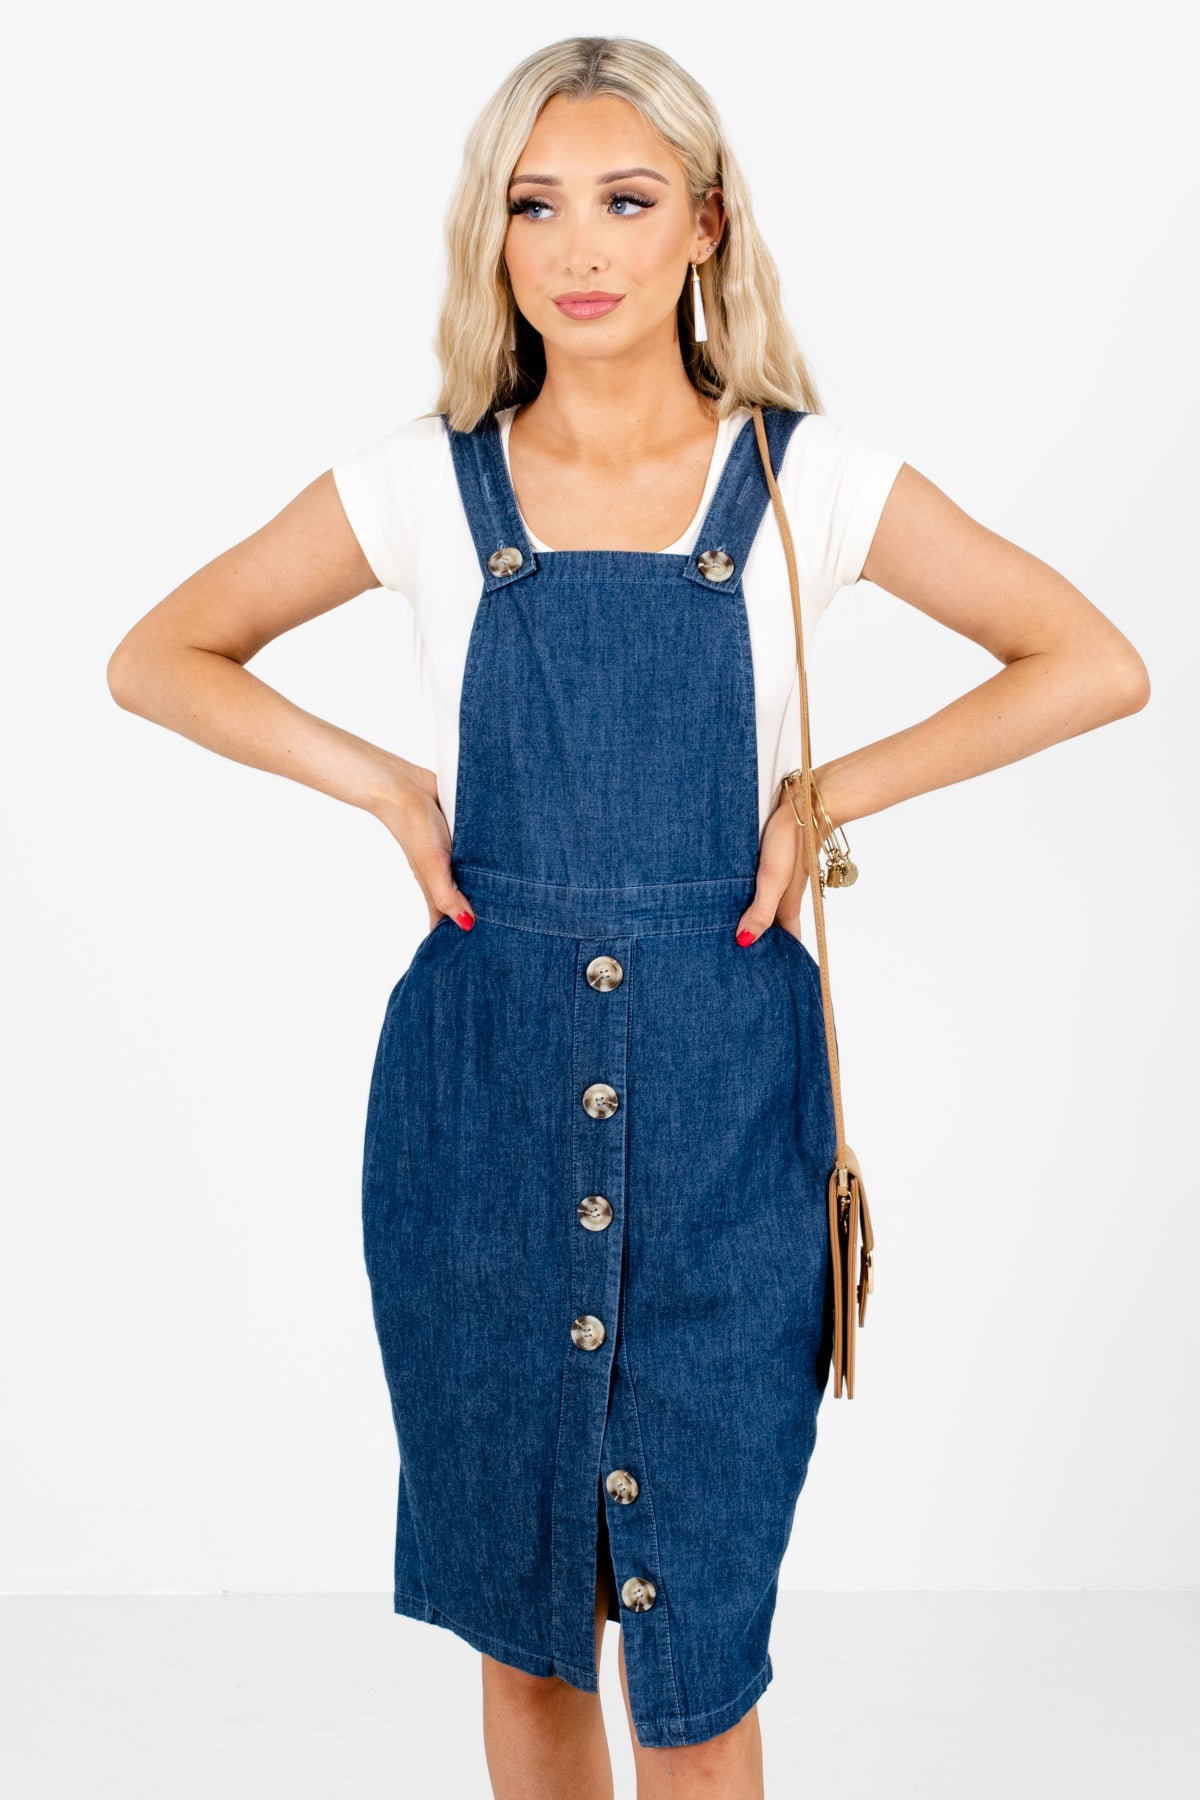 Blue Overall Style Boutique Knee-Length Dresses for Women